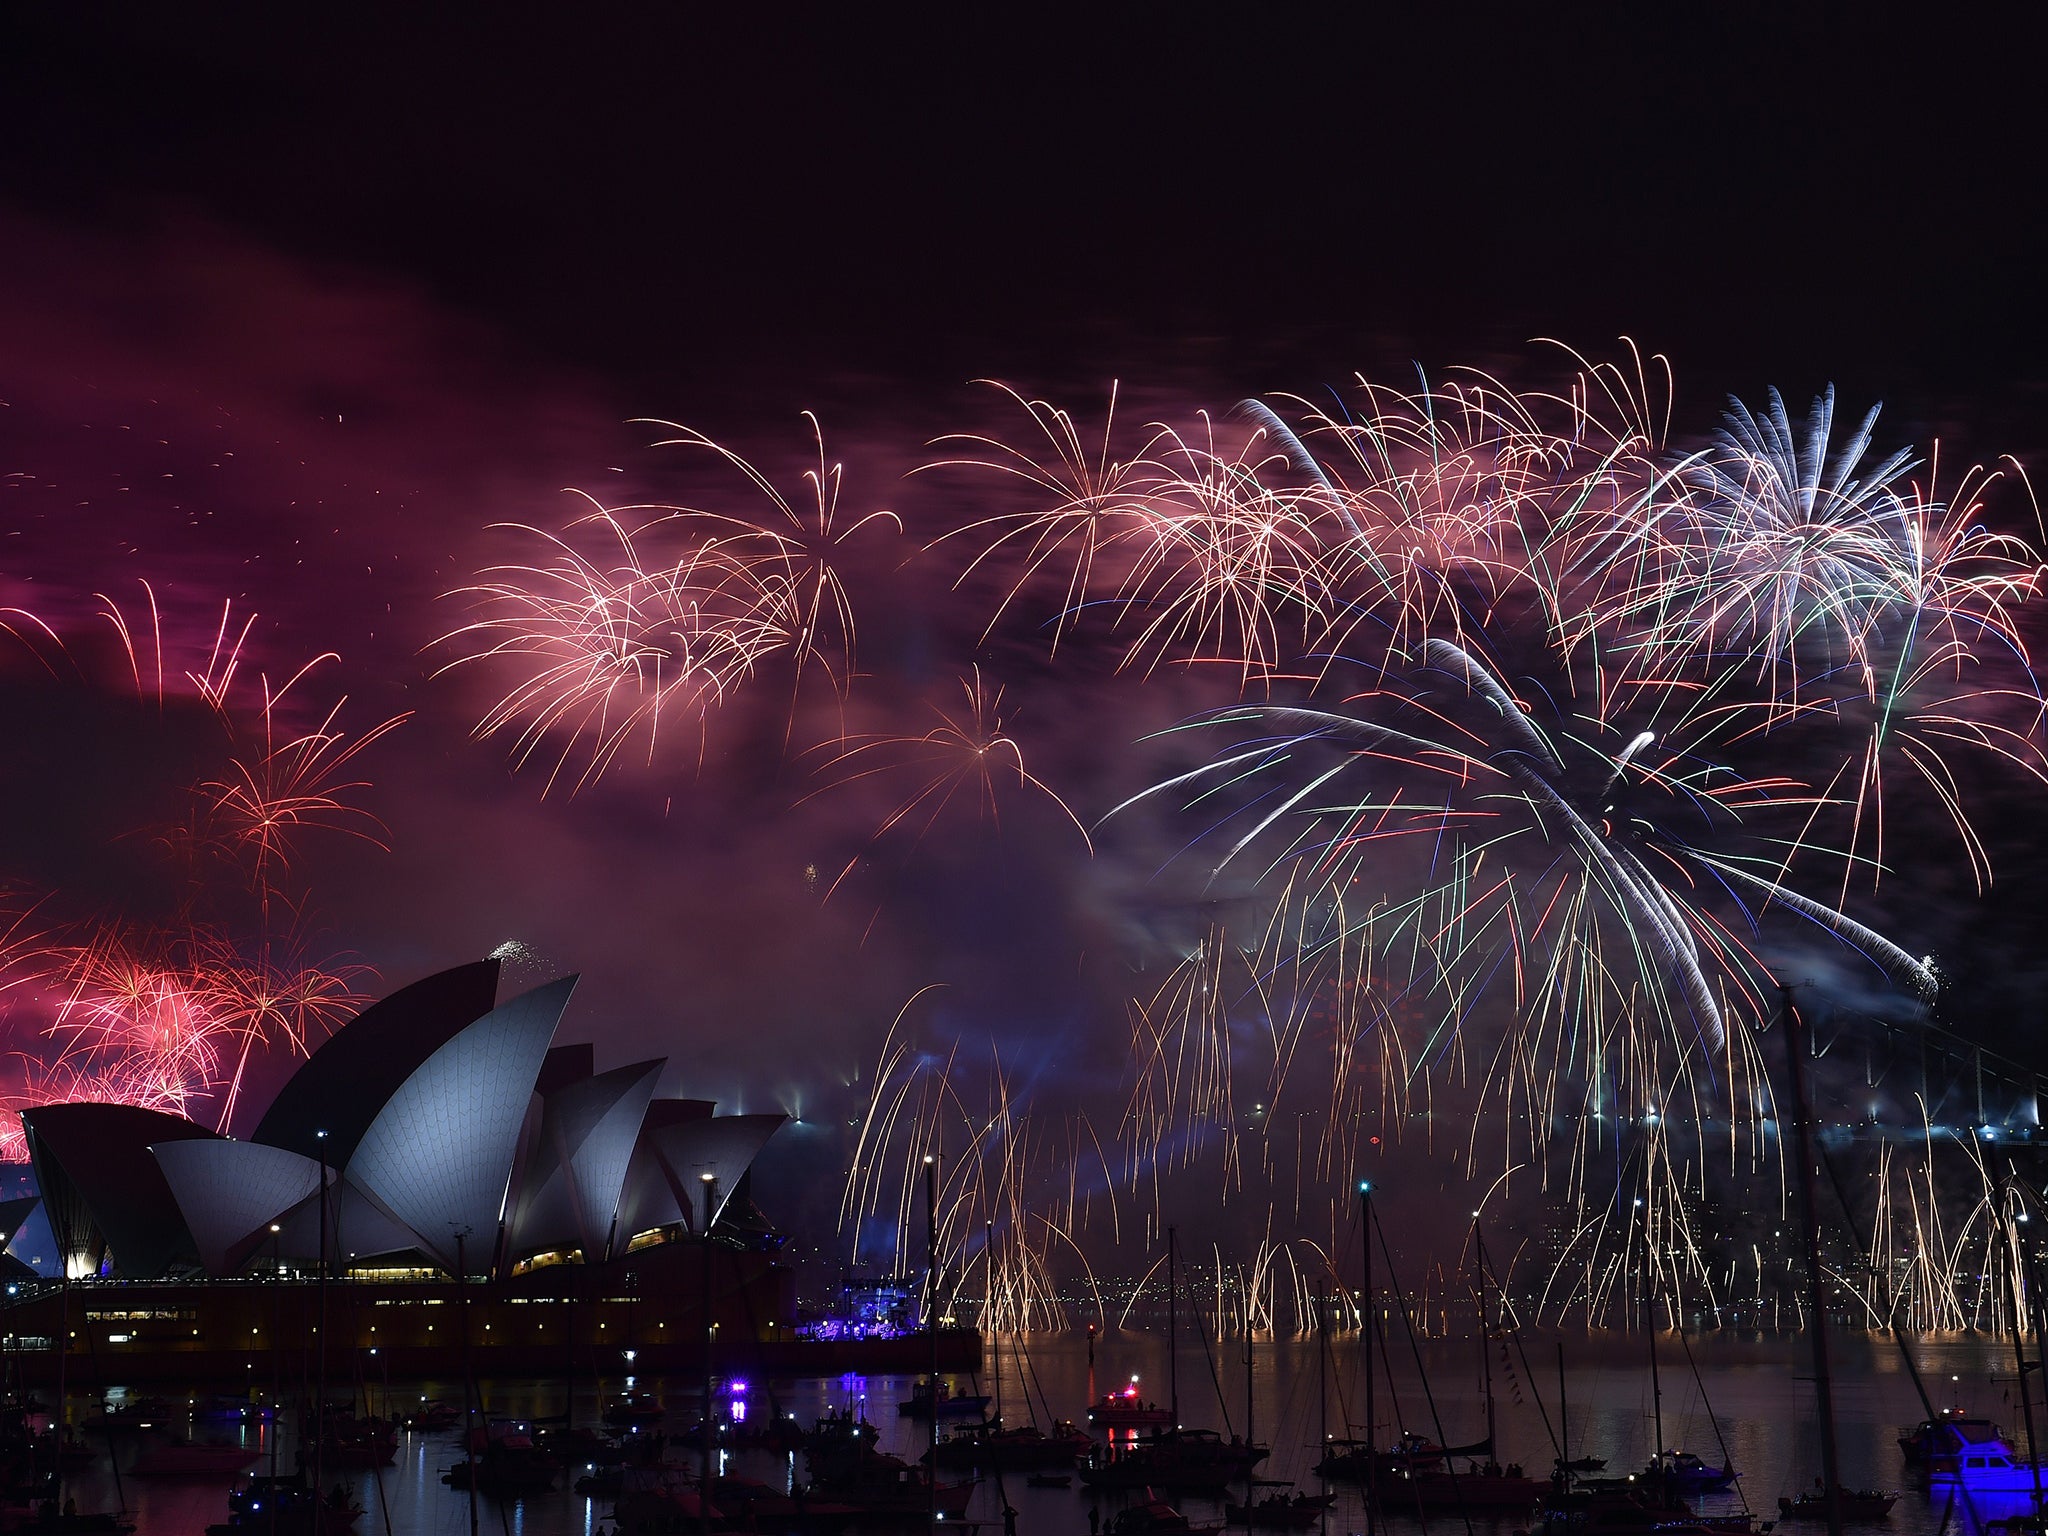 New Year's fireworks erupt over Sydney's iconic Harbour Bridge and Opera House during the traditional fireworks at midnight on January 1, 2015.